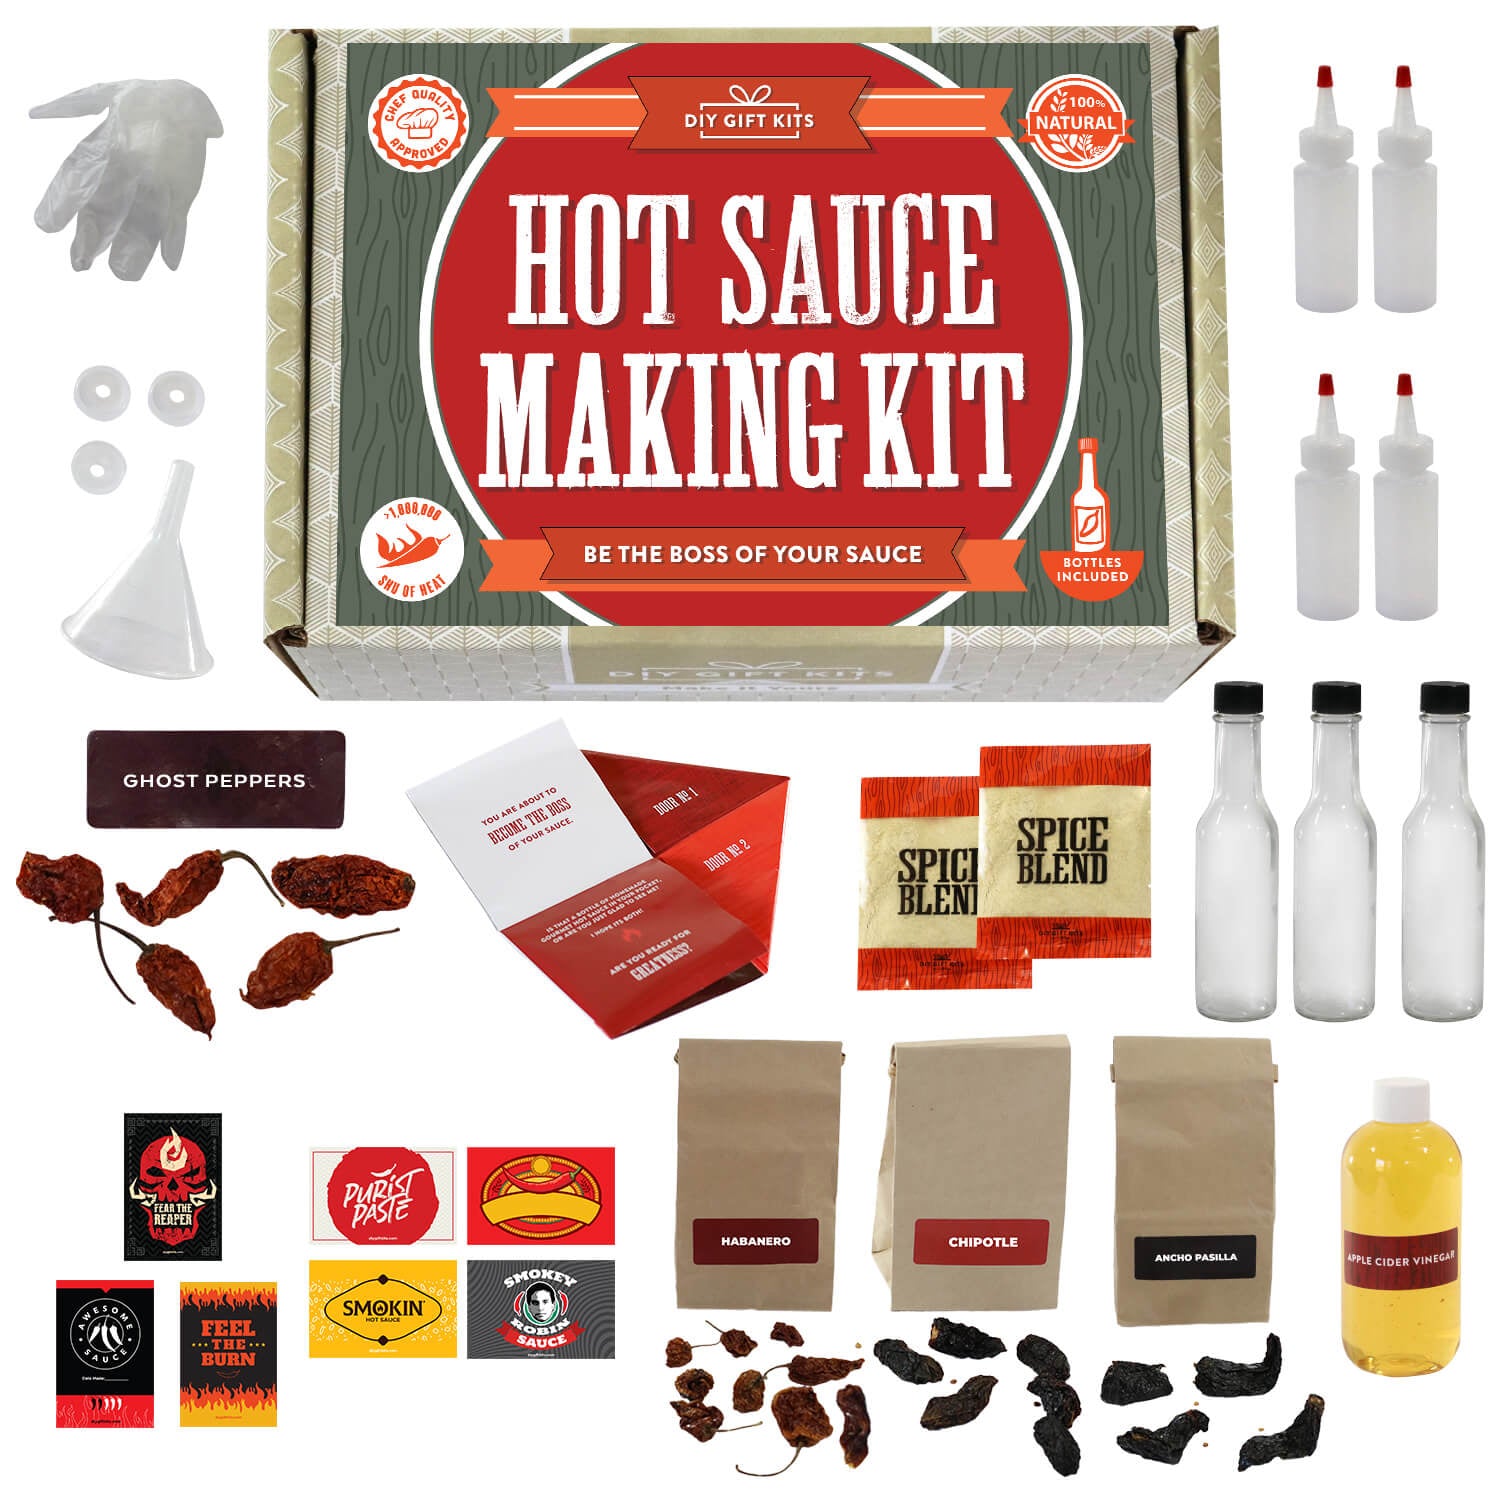 DIY Hot Sauce Kit: Make your own hot sauce using real chili peppers!